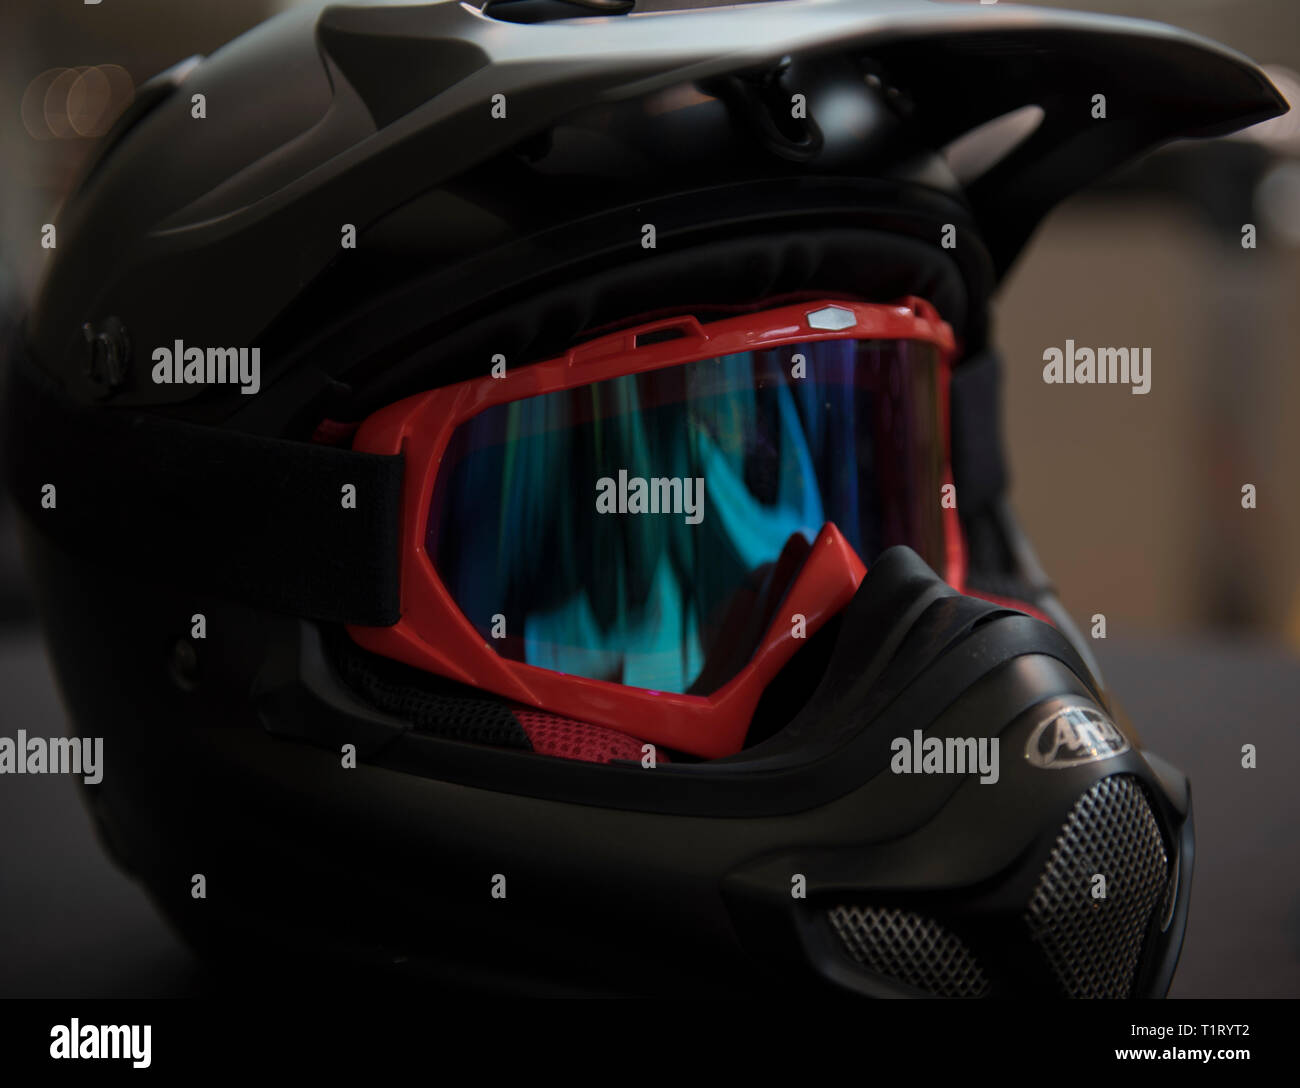 A motorcycle helmet sits on display for riders attending the 86th Airlift Wing annual pre-season motorcycle safety briefing at the Kaiserslautern Military Community Center on Ramstein Air Base, Germany, March 15, 2019. The briefing covered safety precautions, German road laws, proper protective gear to wear while riding, and testimonies from guest speakers. ( U.S. Air Force photo by Airman 1st Class Kaylea Berry) Stock Photo